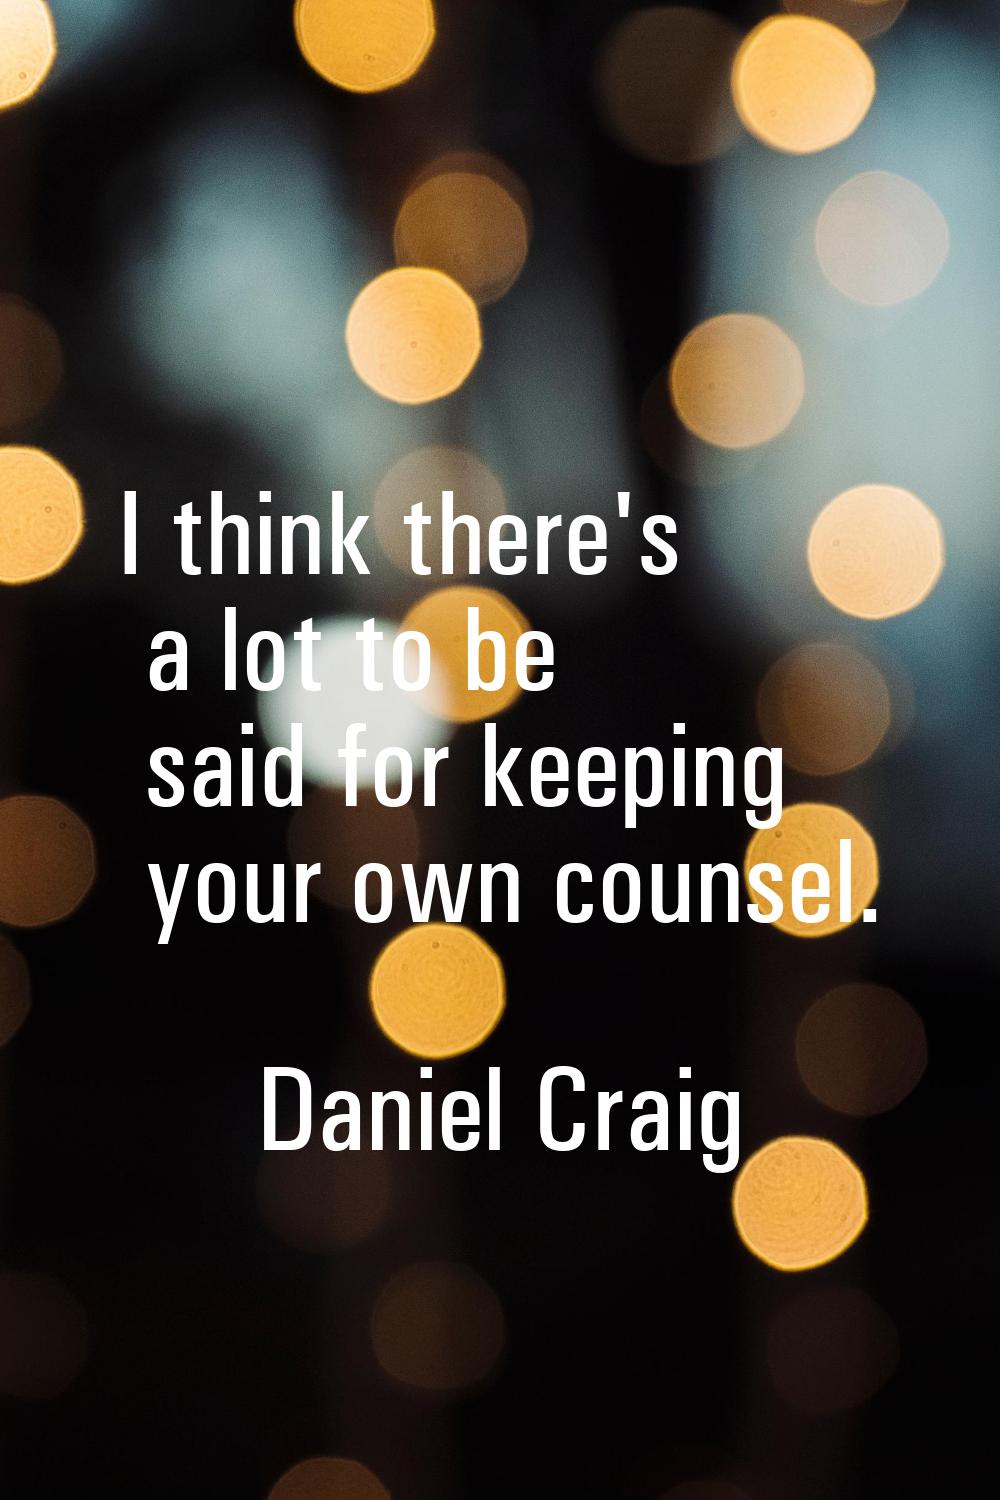 I think there's a lot to be said for keeping your own counsel.